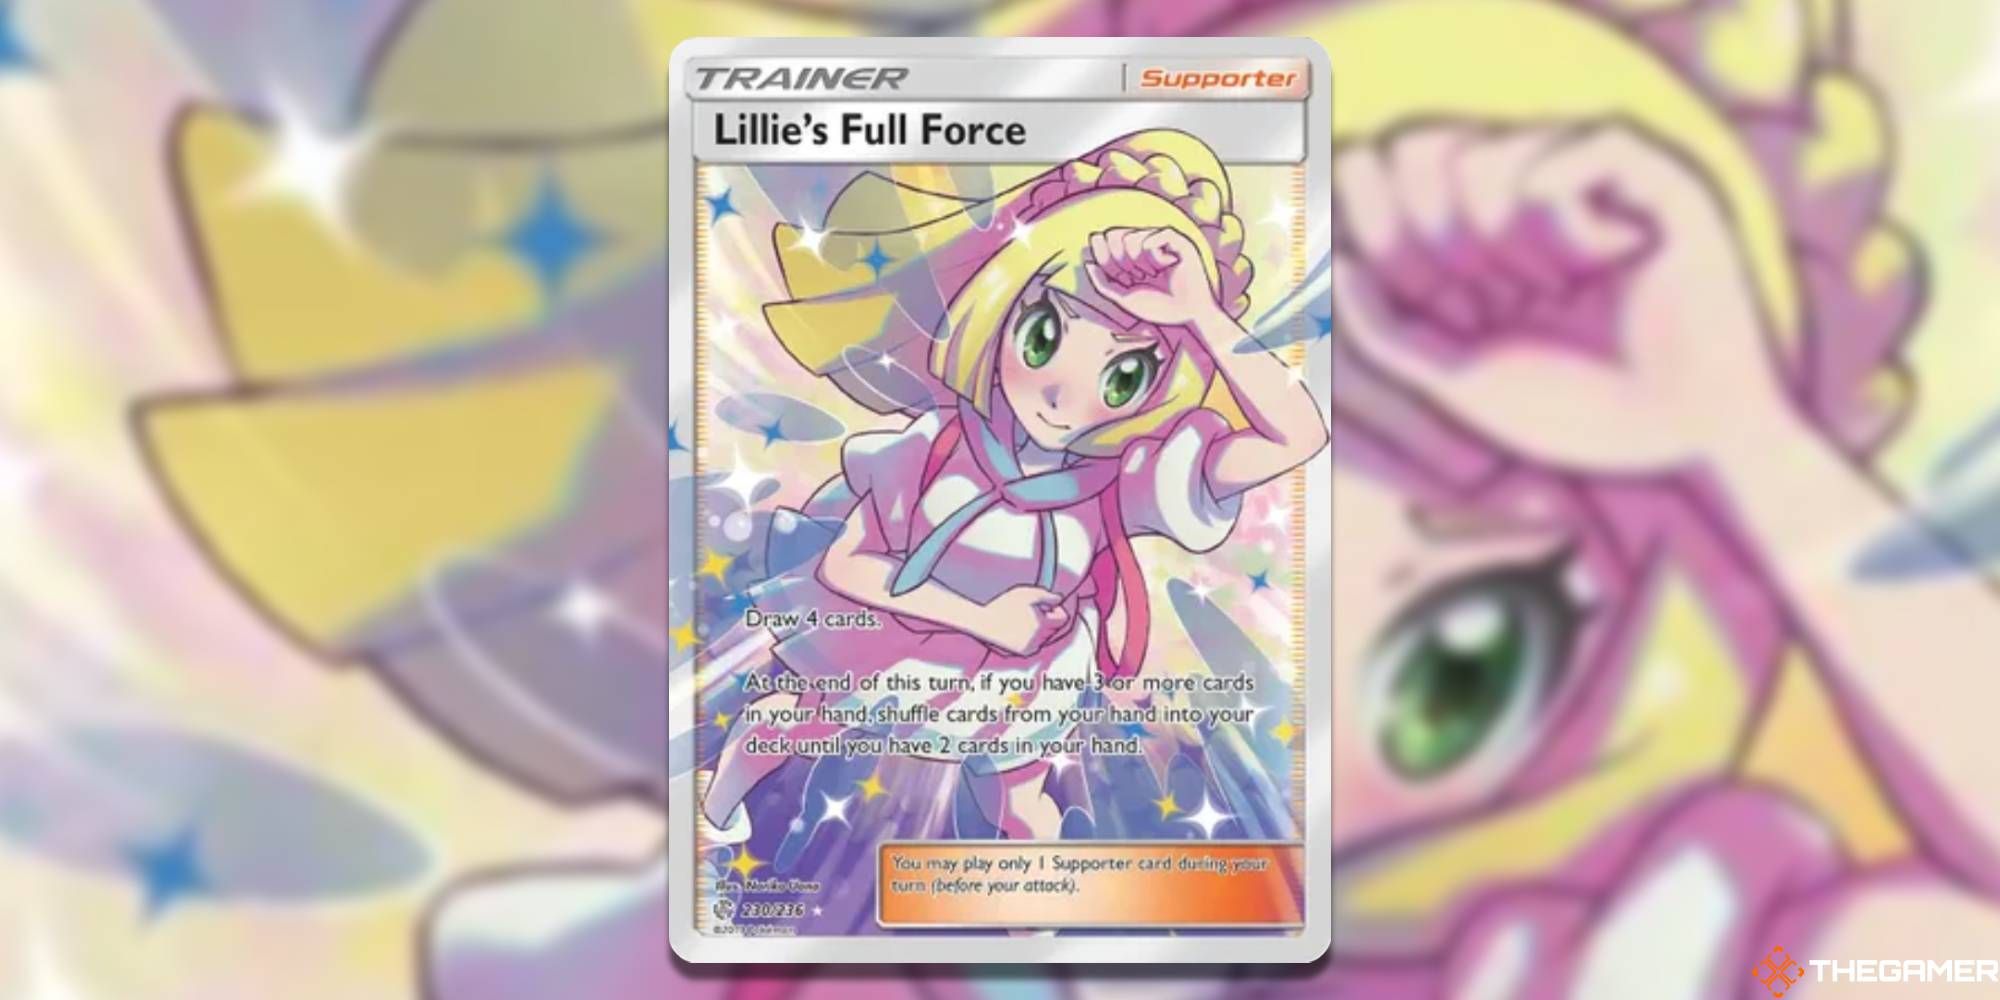 Pokemon TCG Full Art Lillie's Full Force from SM-Cosmic Eclipse with blurred background